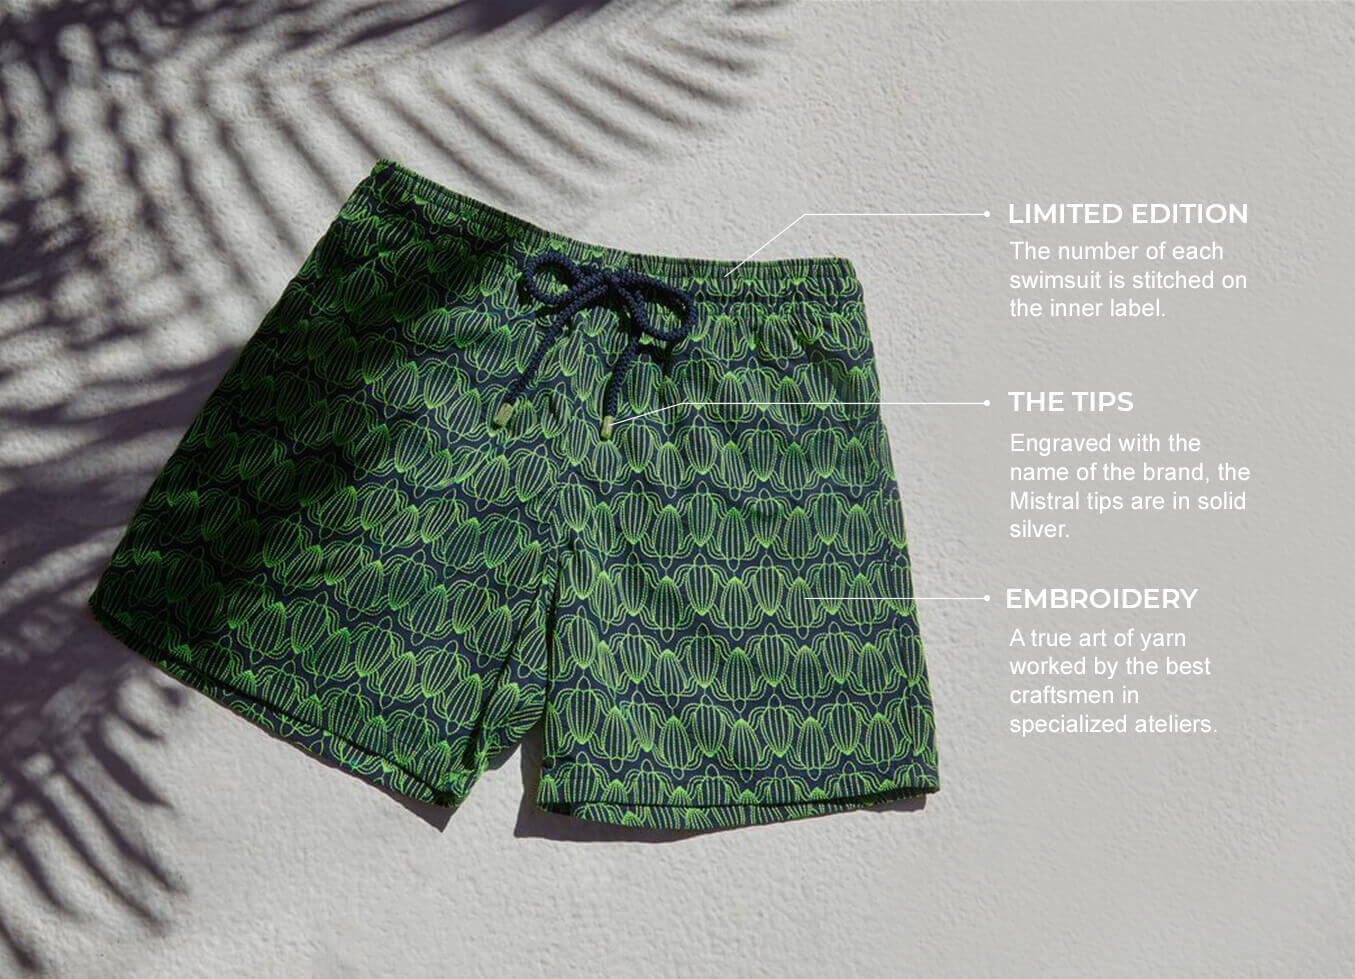 Limited edition embroidered swim suit for men